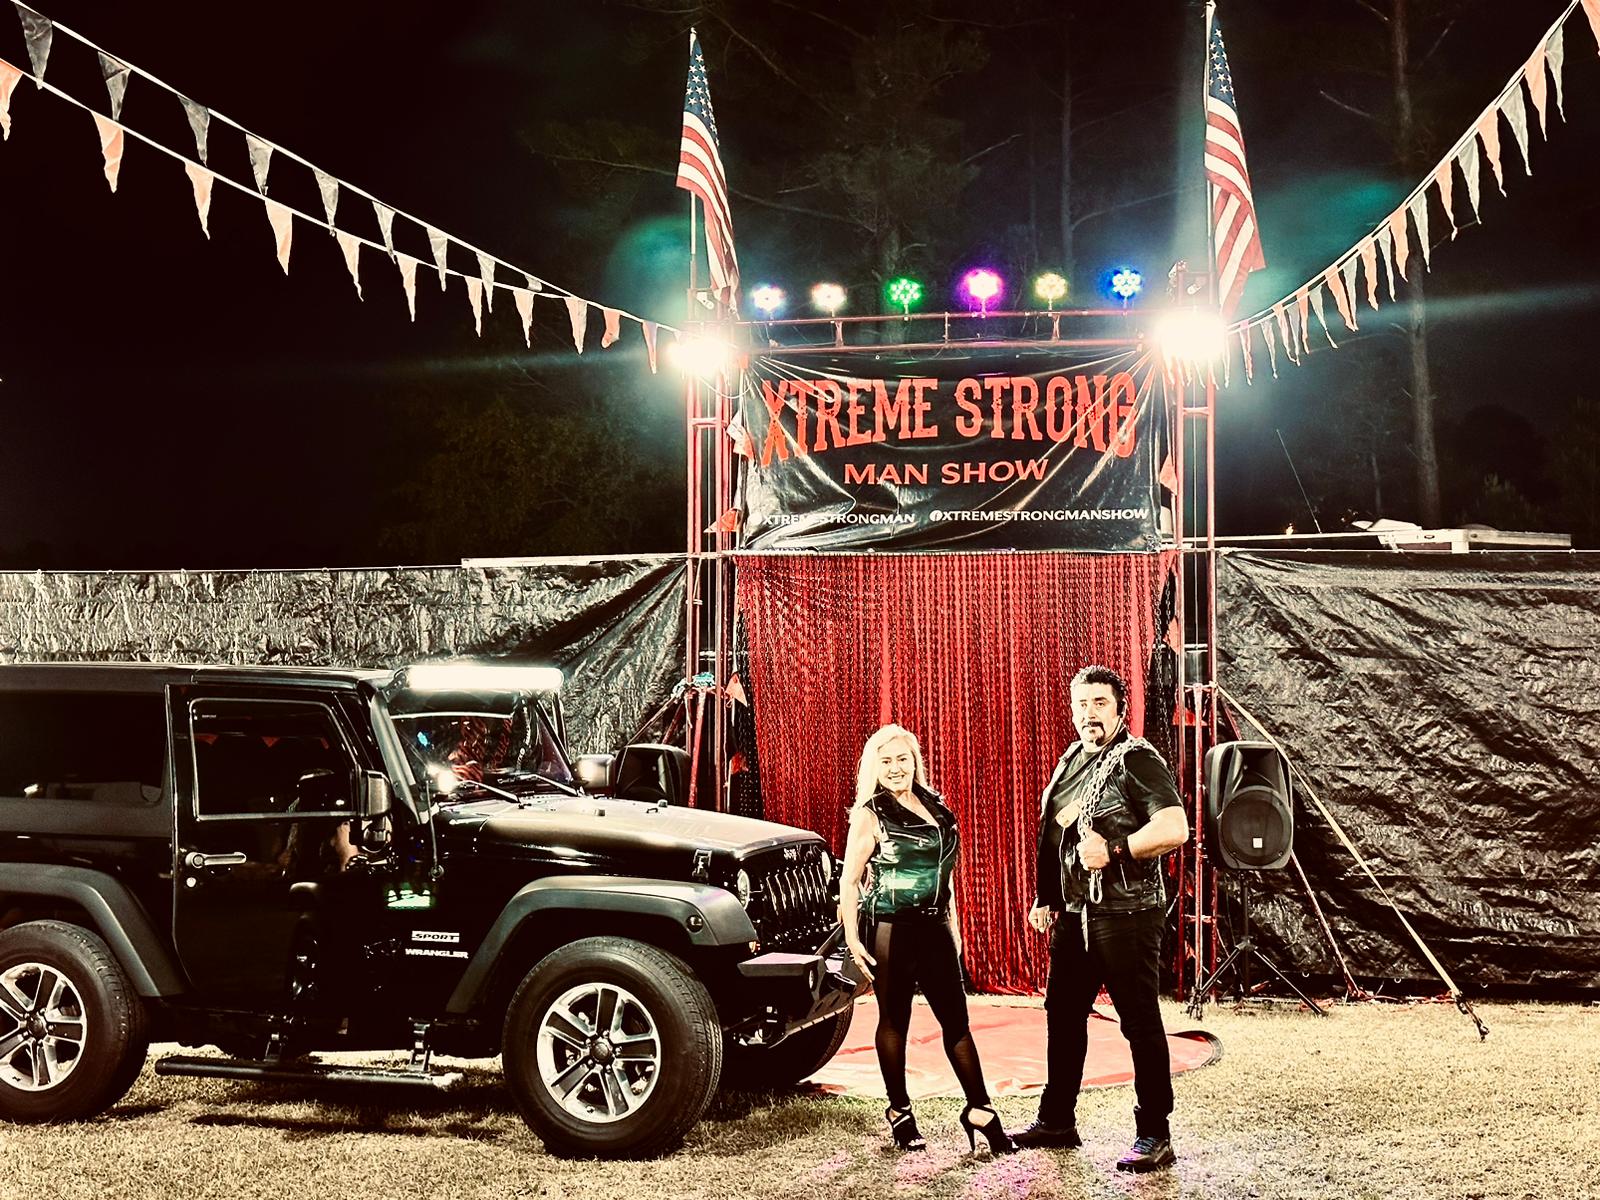 Xtreme Strong Man Show